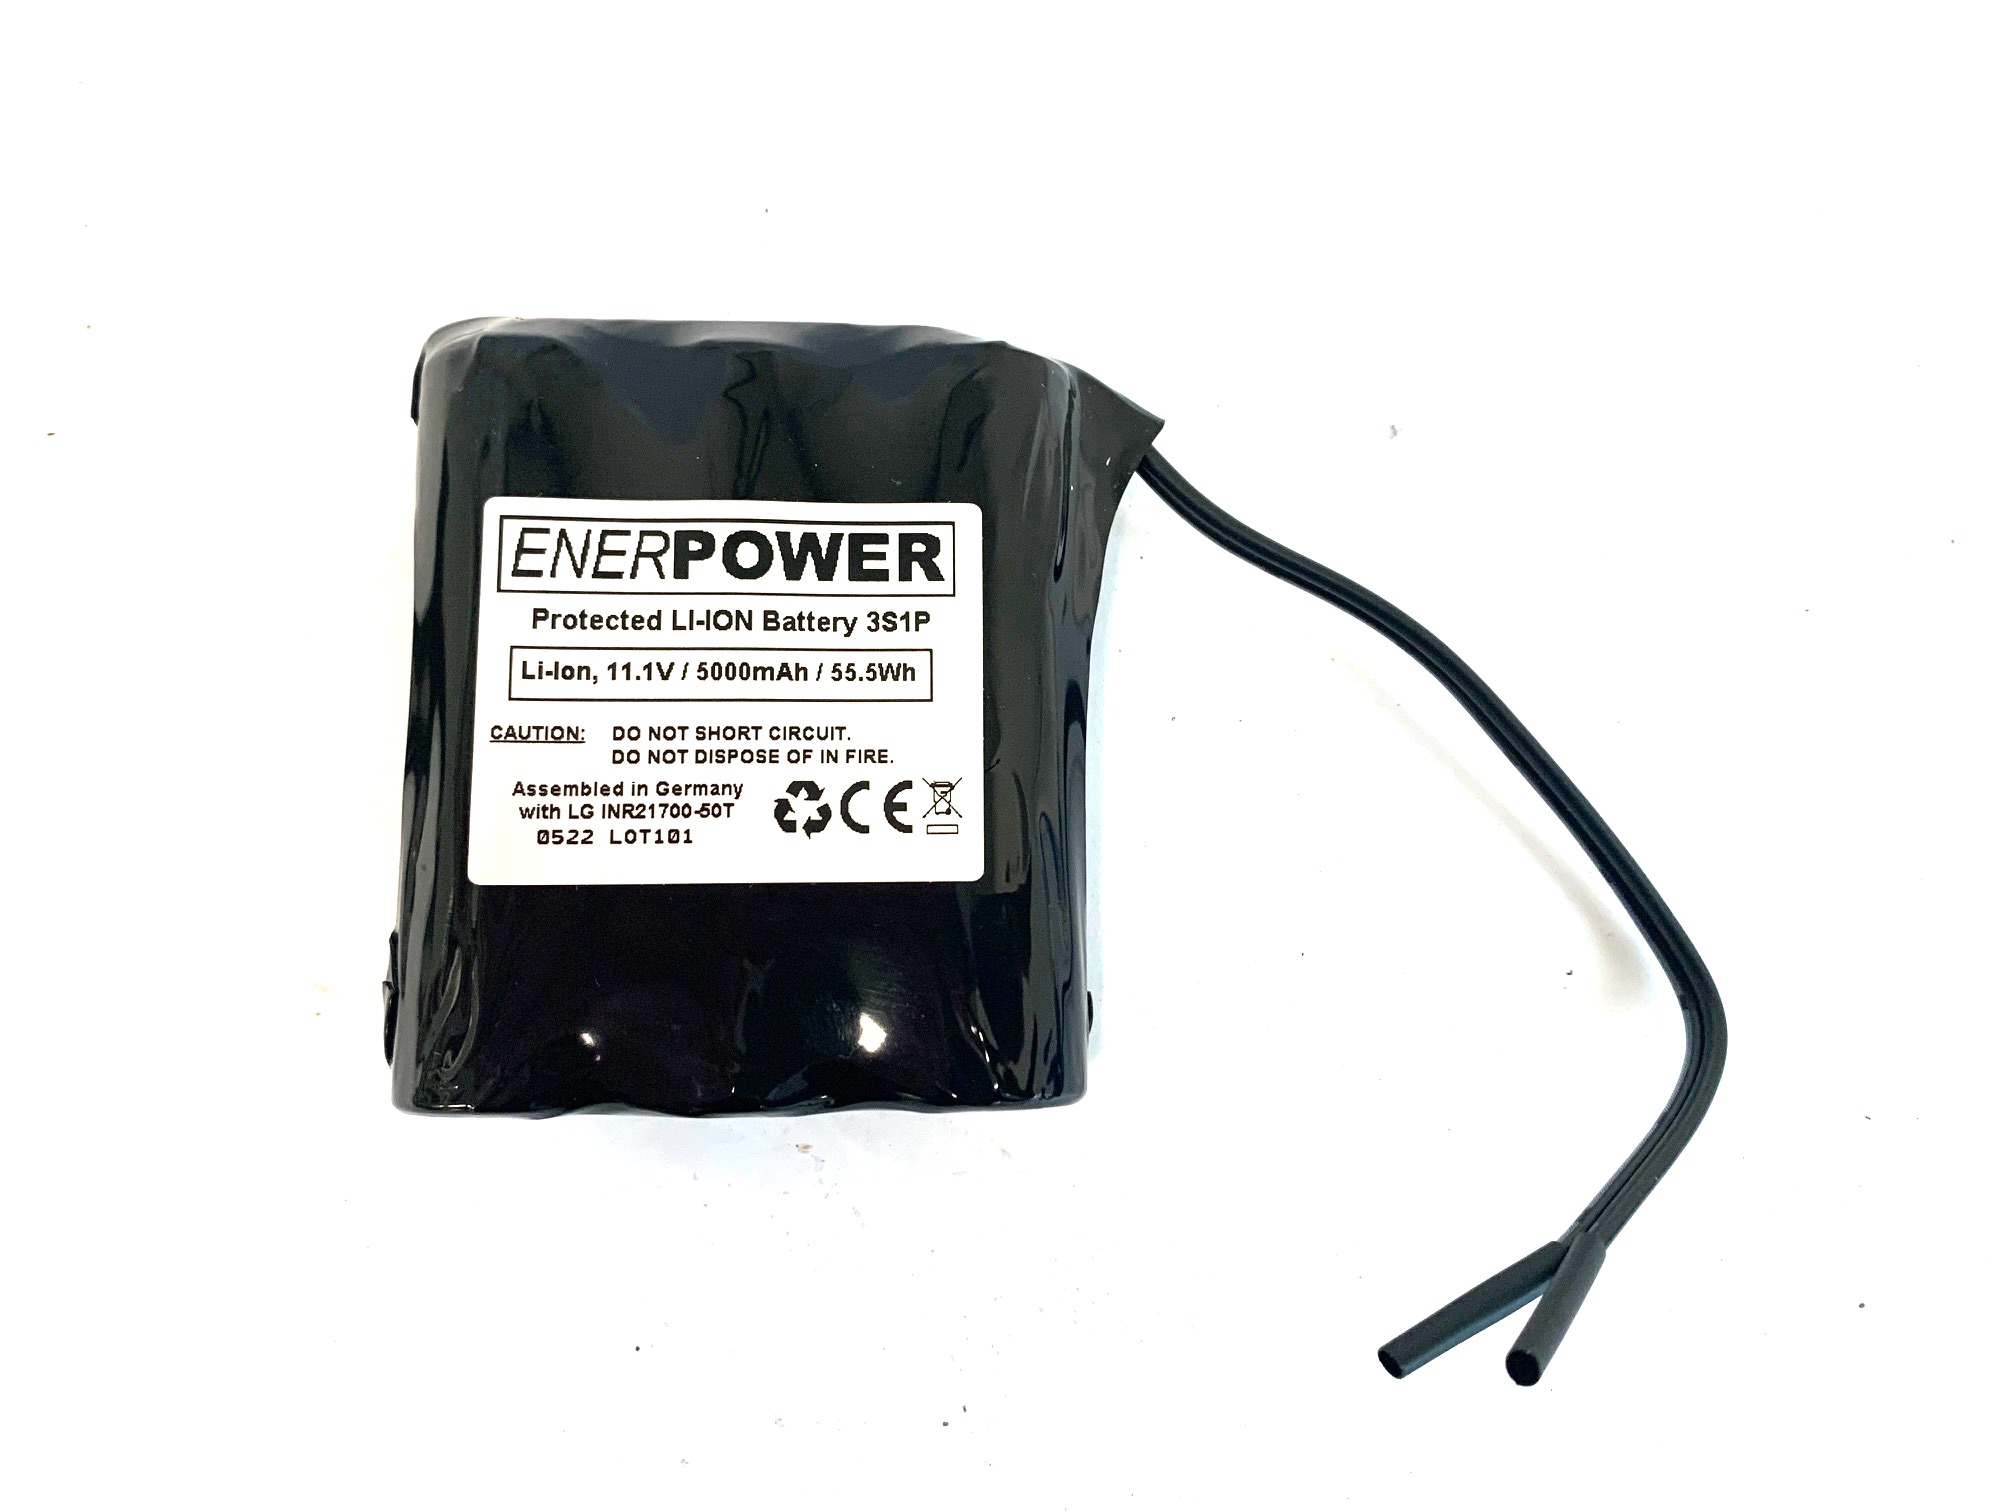 ENERpower Battery 10.8V-11.1V (12V) 5000 mAh with Cables Open-Ends  (3x1)